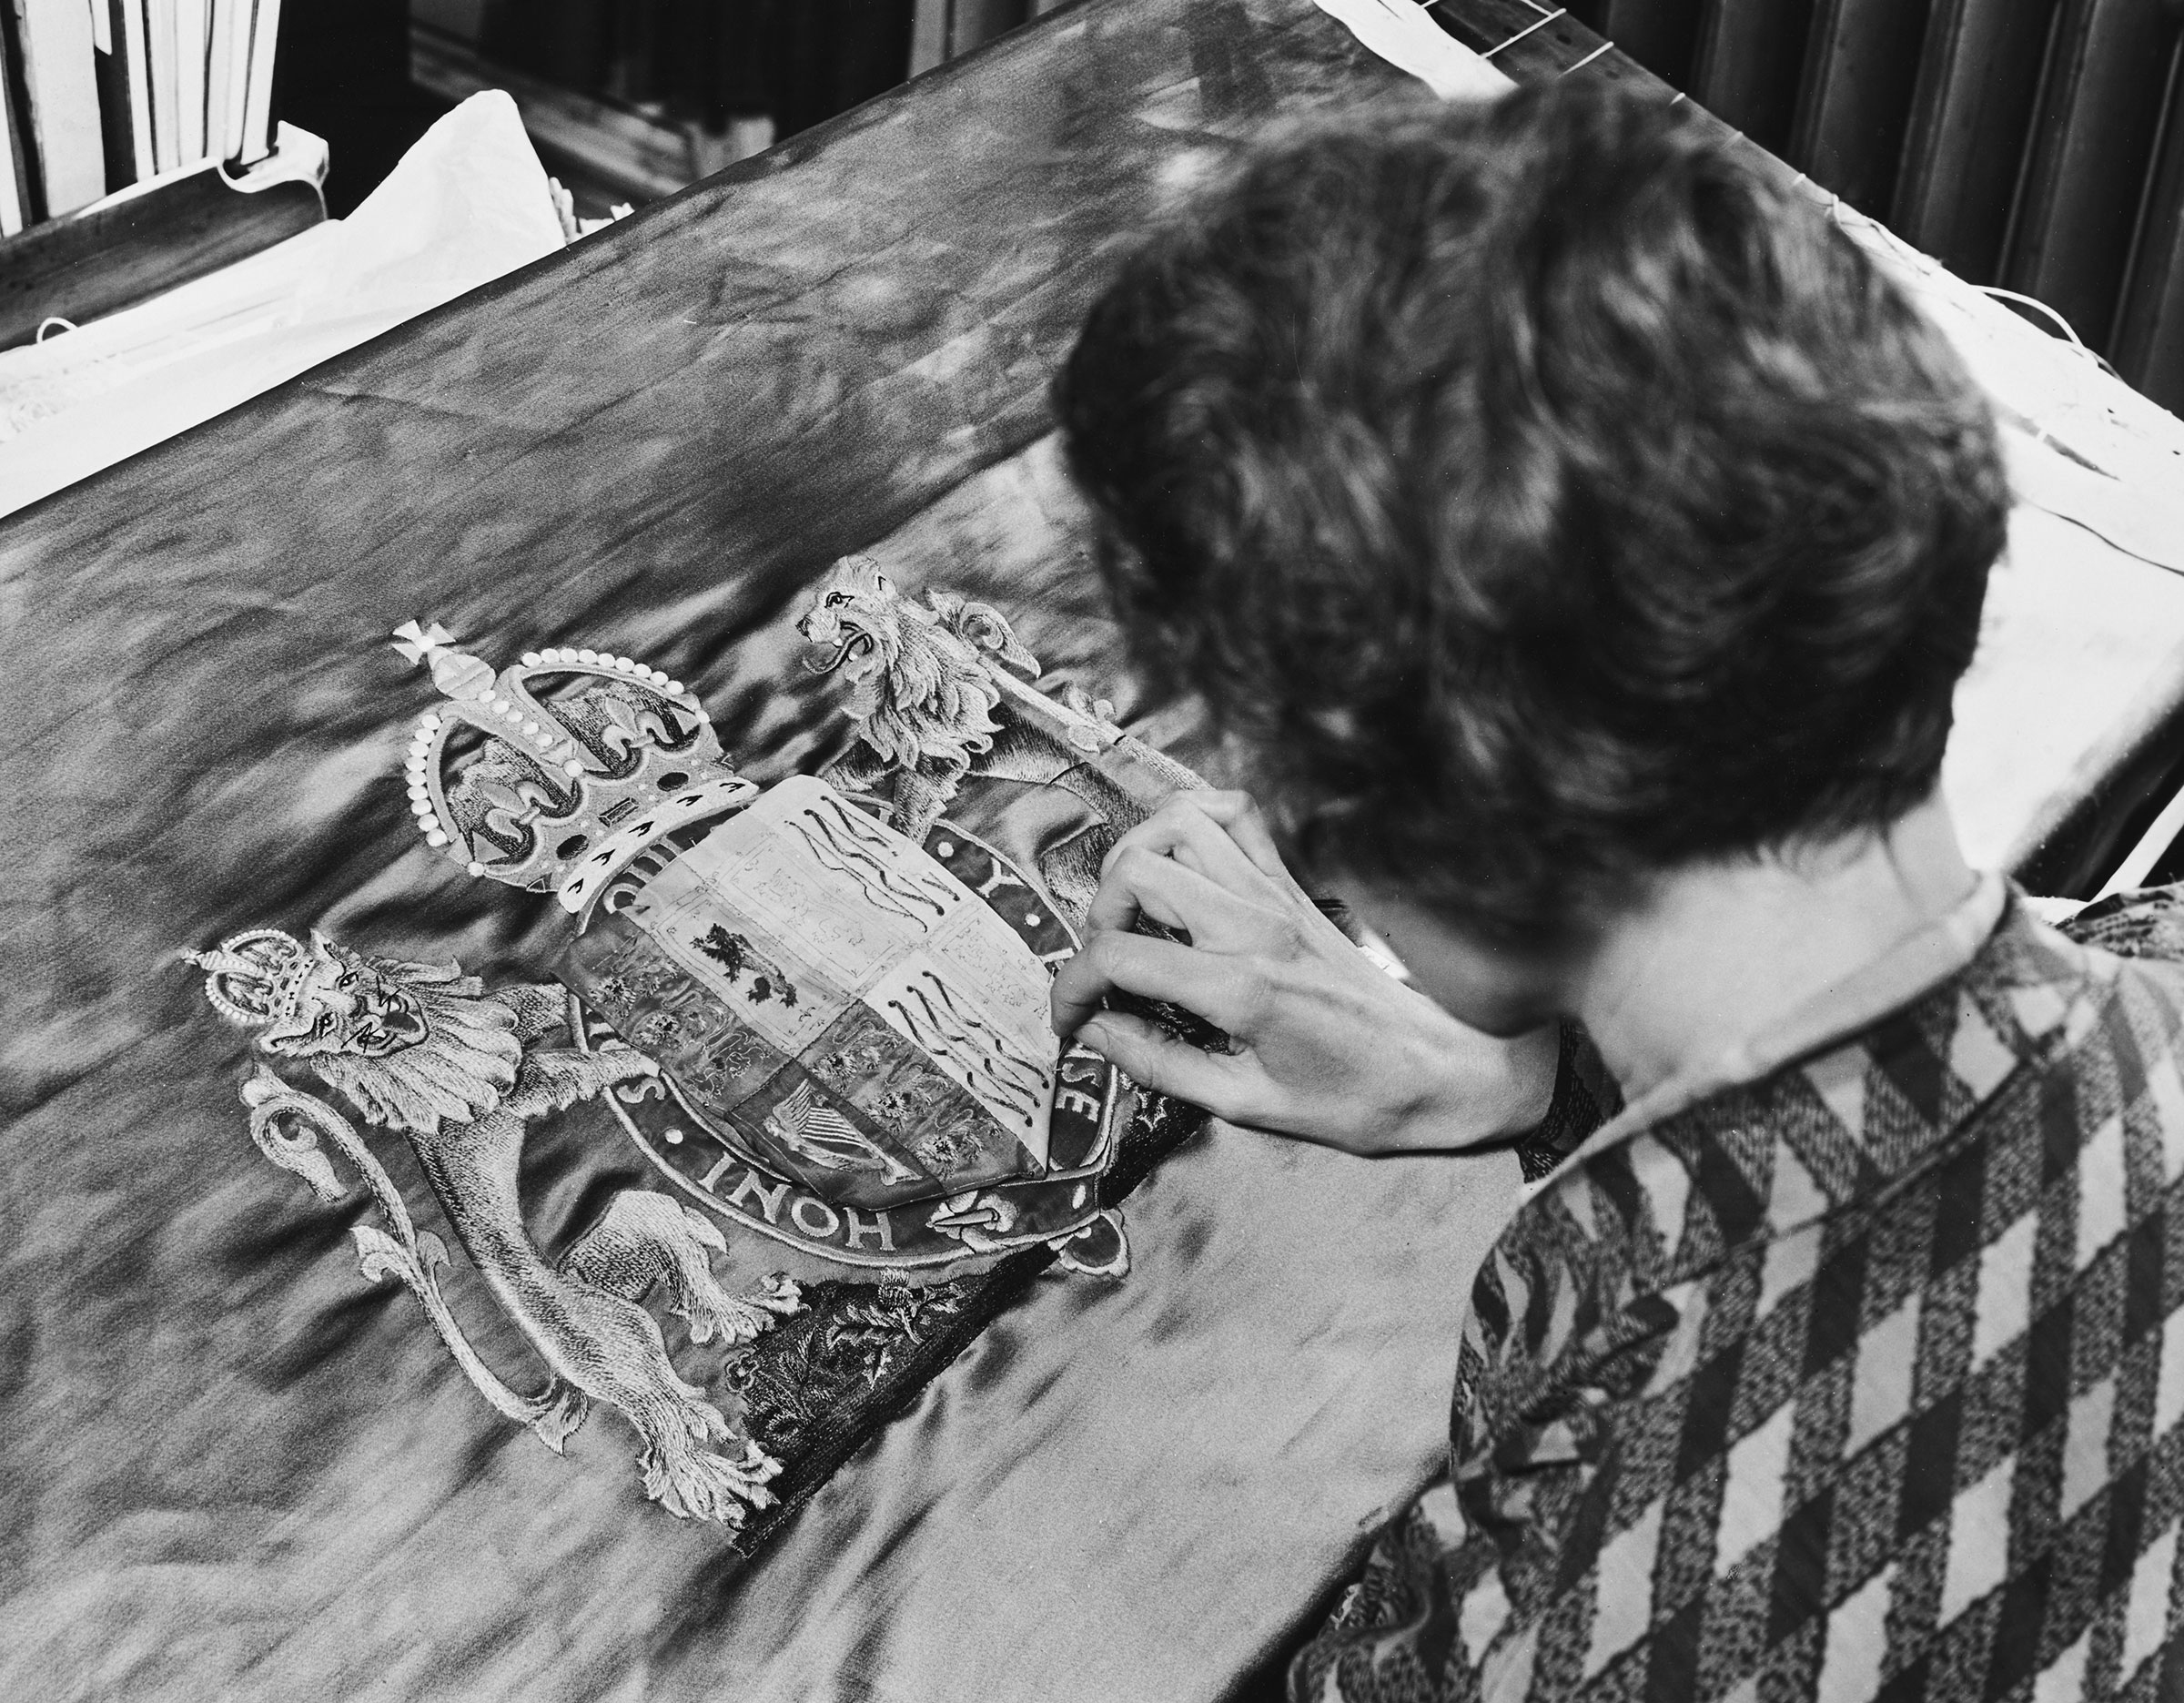 A woman sews Queen Elizabeth's crest for the Chair of Recognition, for the coronation ceremony of George VI and Queen Elizabeth, on March 18, 1937. (Fox Photos/Hulton Archive/Getty Images)